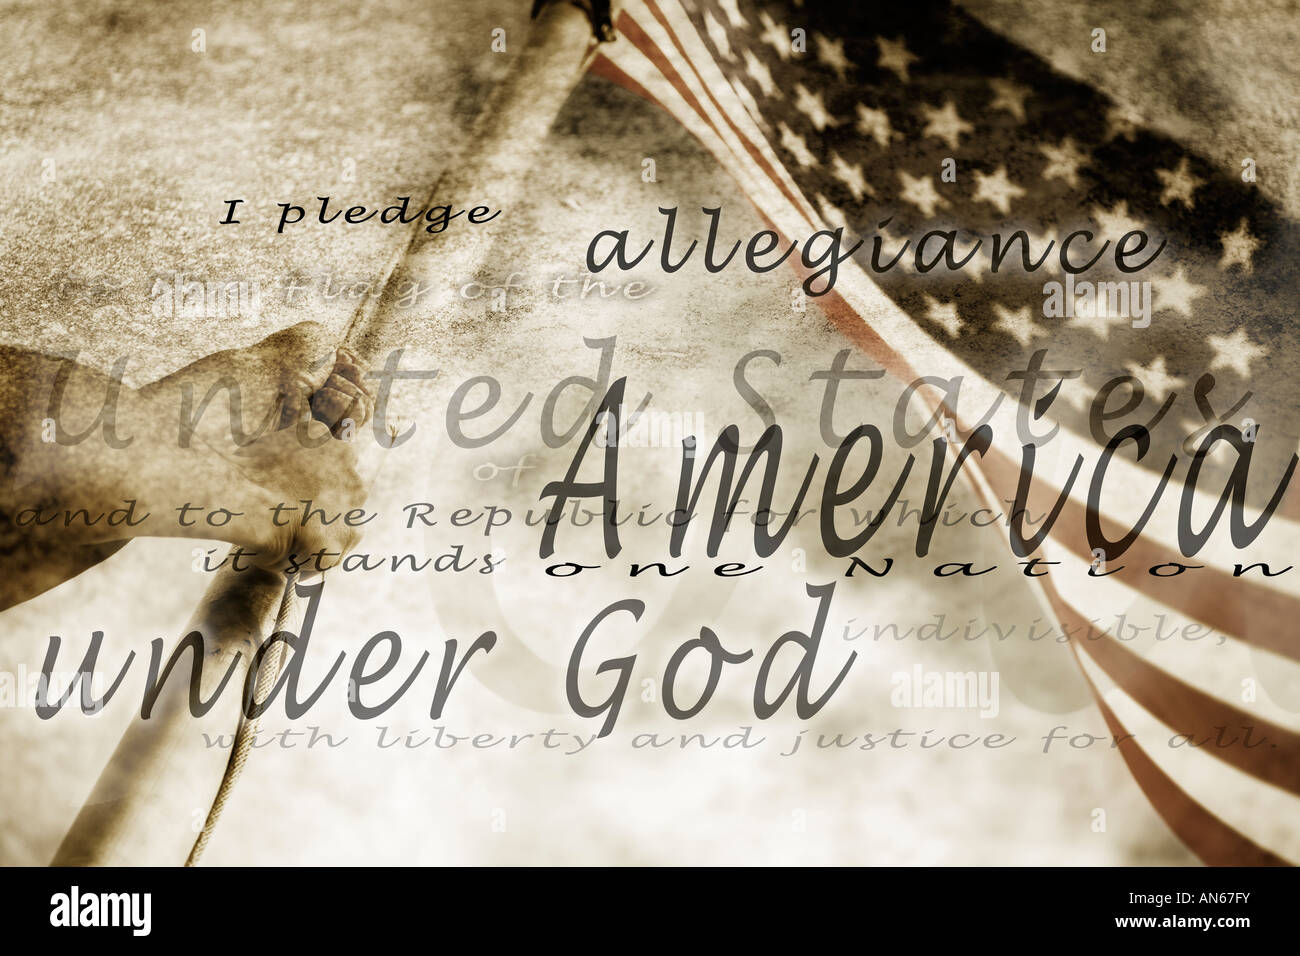 The Pledge of Allegiance and an American flag Stock Photo